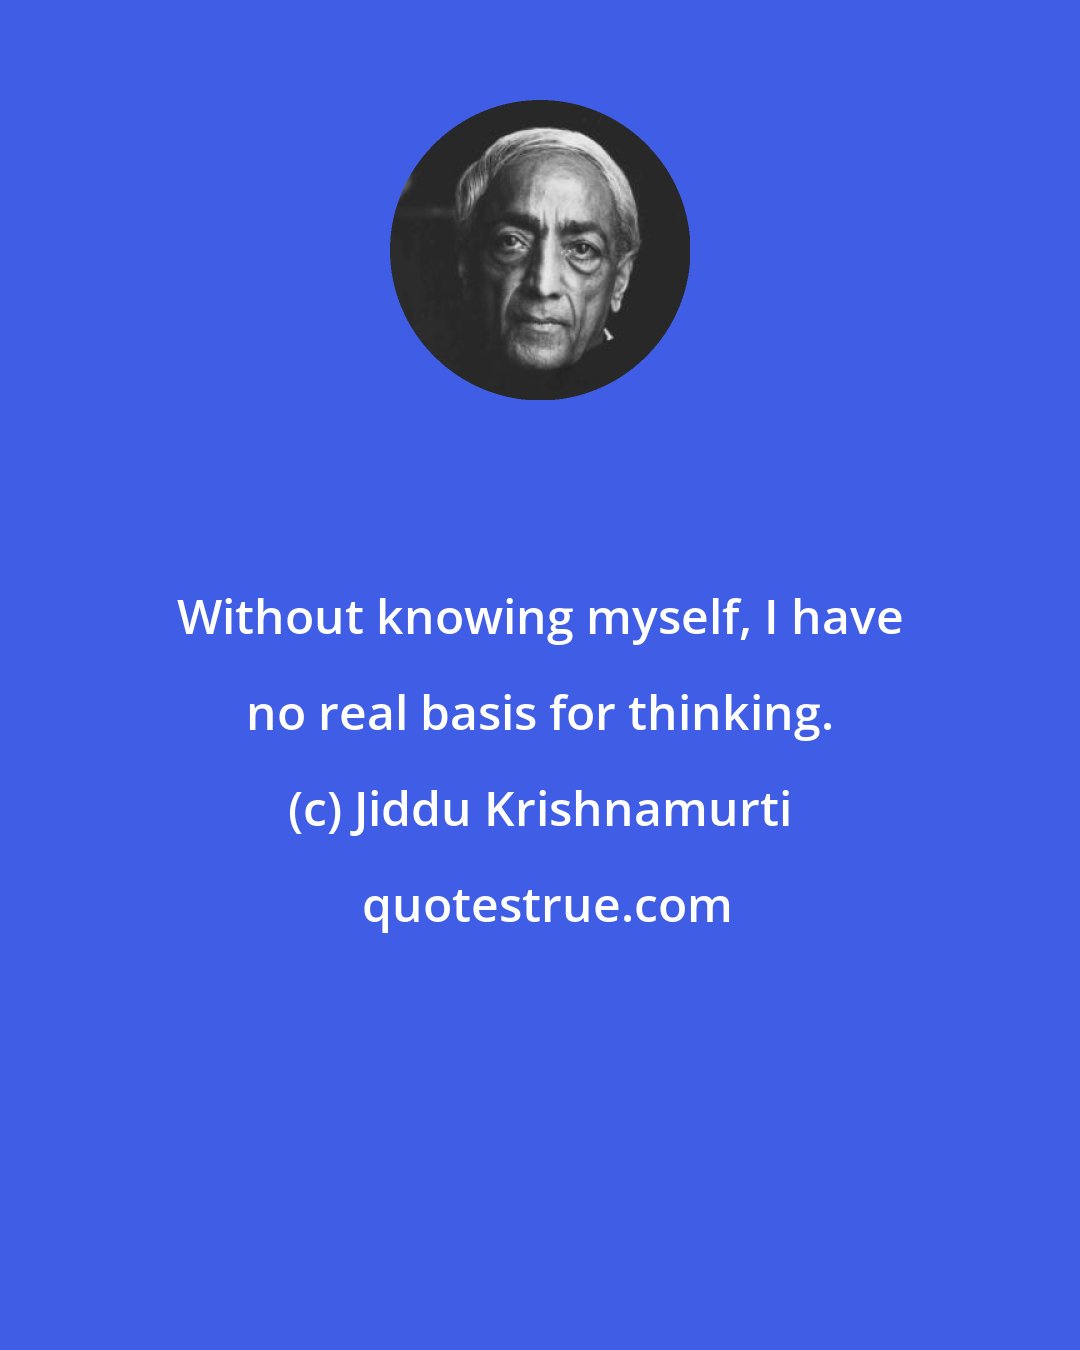 Jiddu Krishnamurti: Without knowing myself, I have no real basis for thinking.